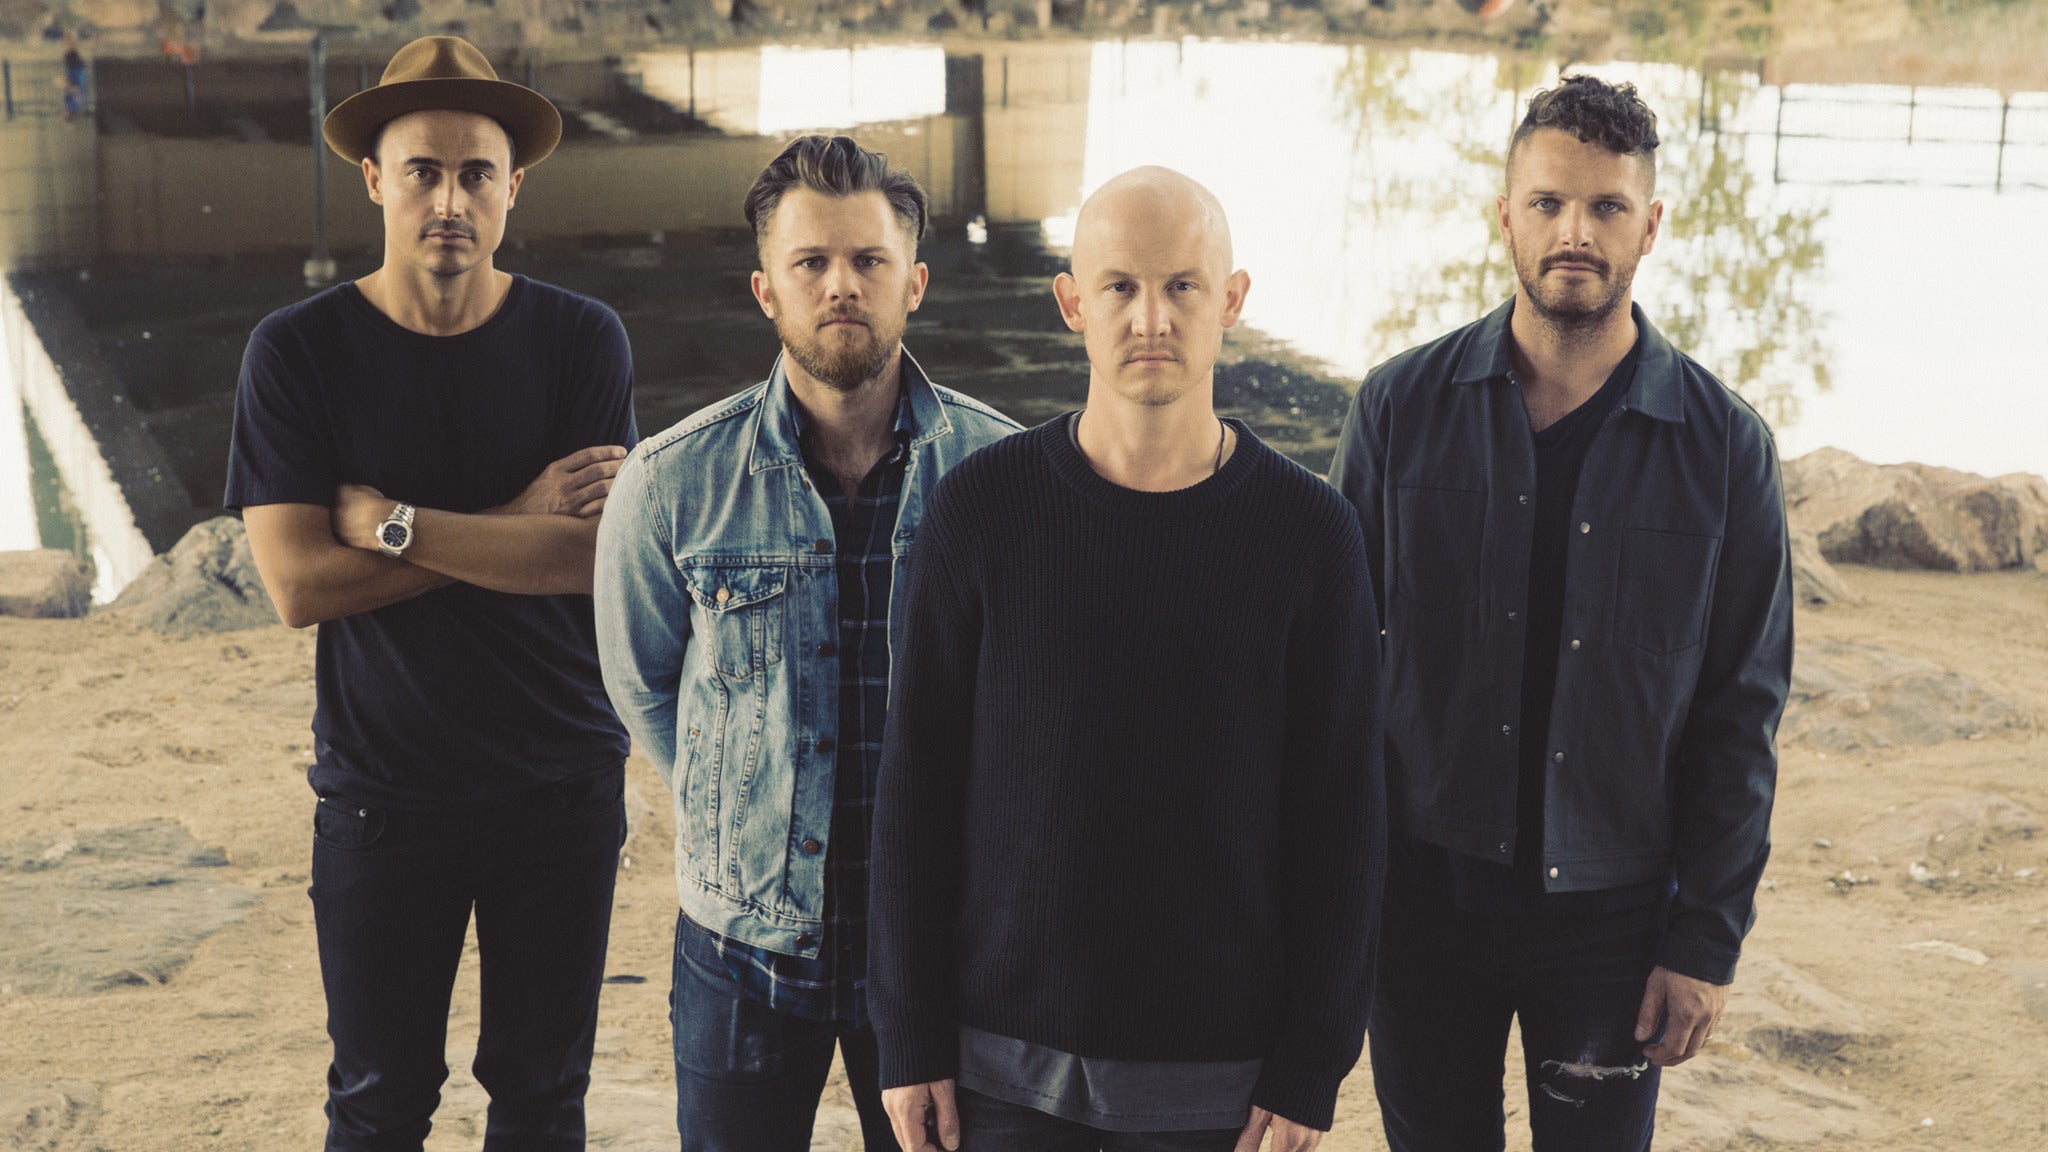 the fray scars and stories album download